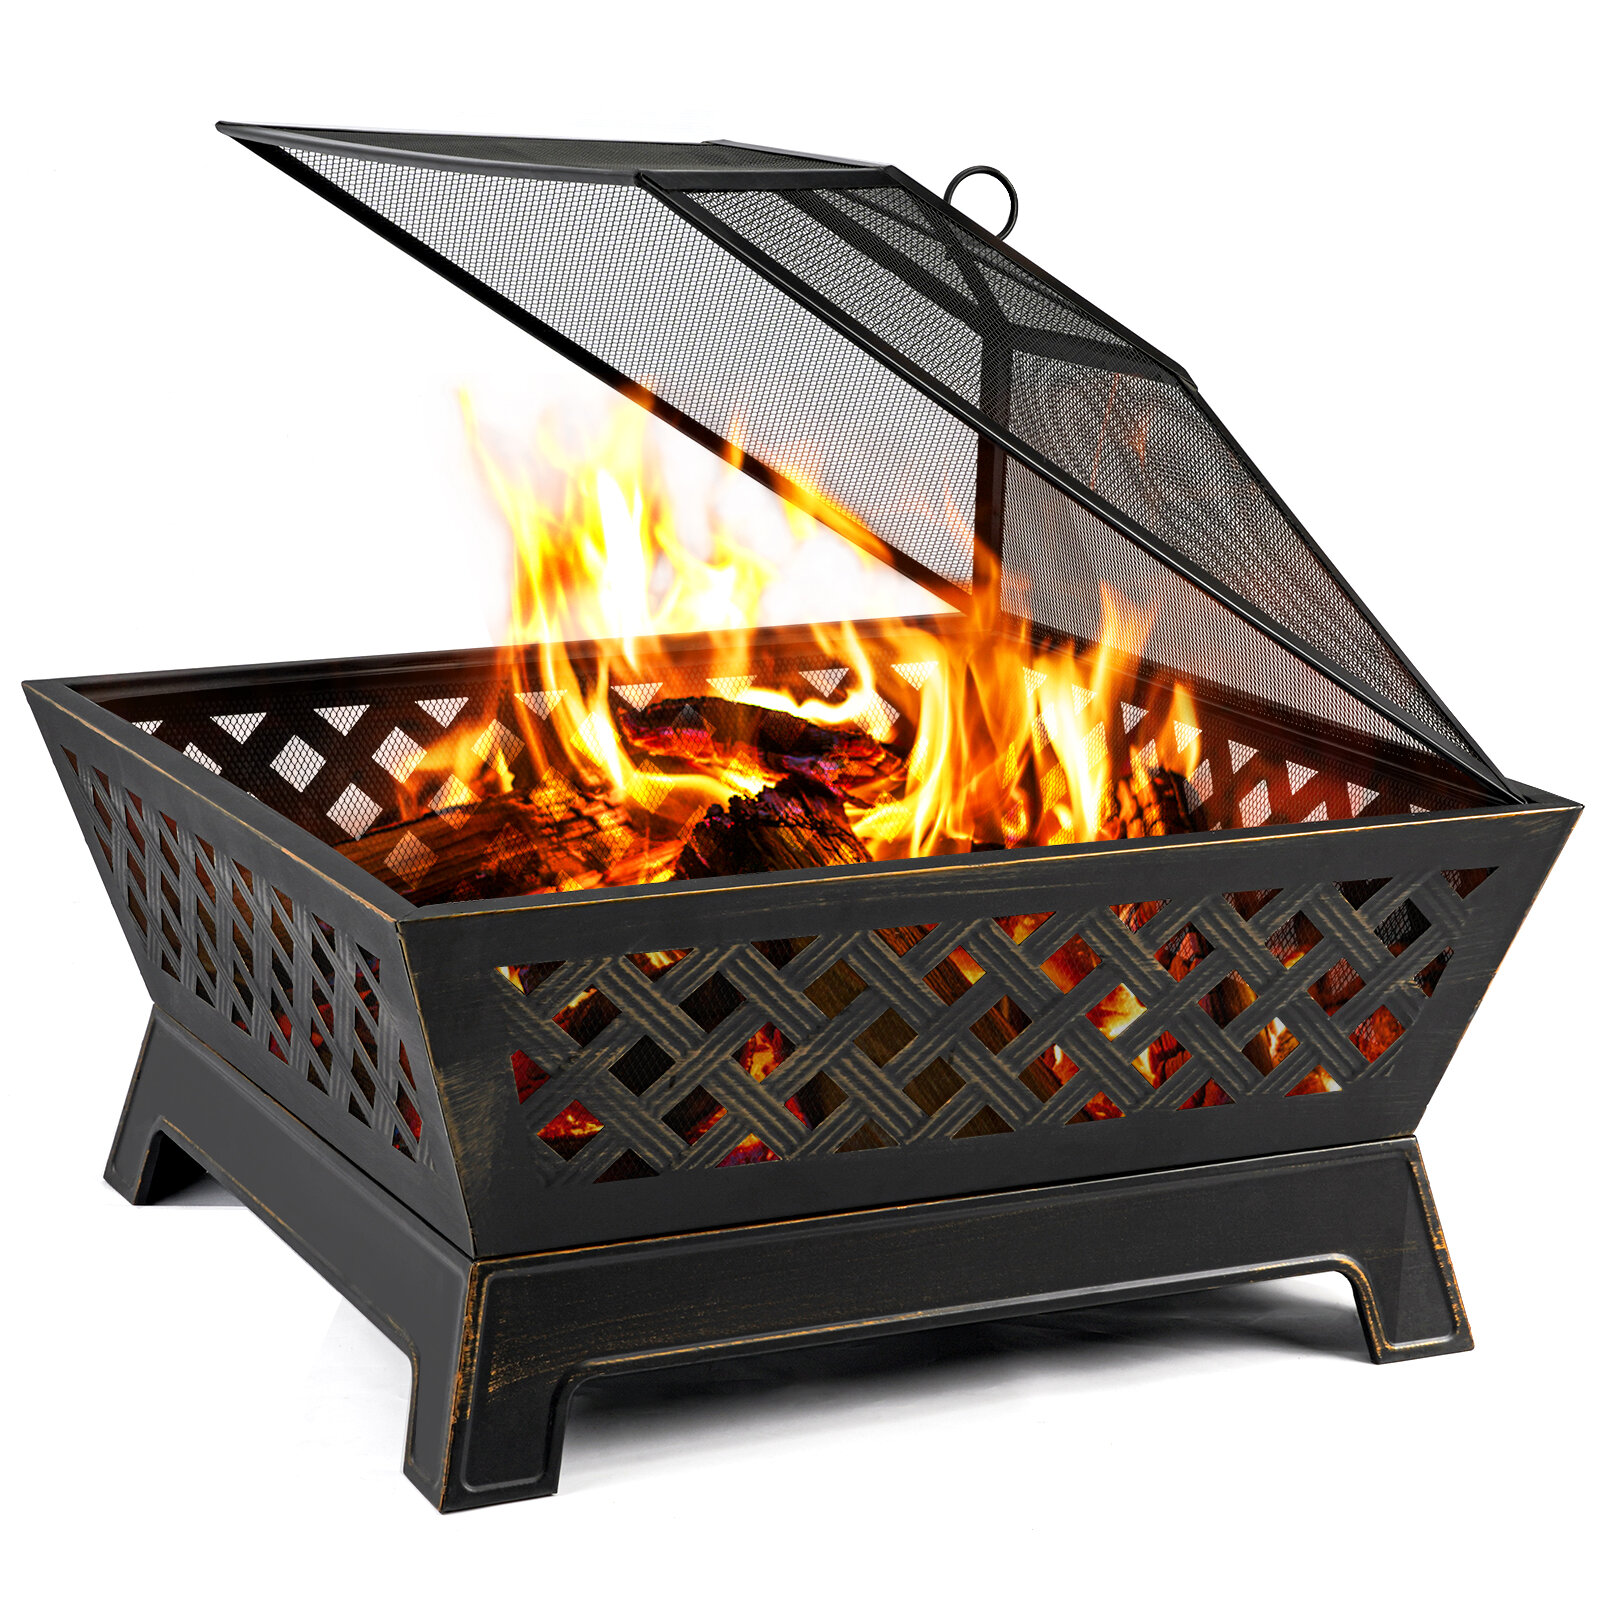 

34 Inch Fire Pits Large Wood Burning Deep Steel Firepitsm with Ash Plate Water Drainage Hole Spark Screen Poker